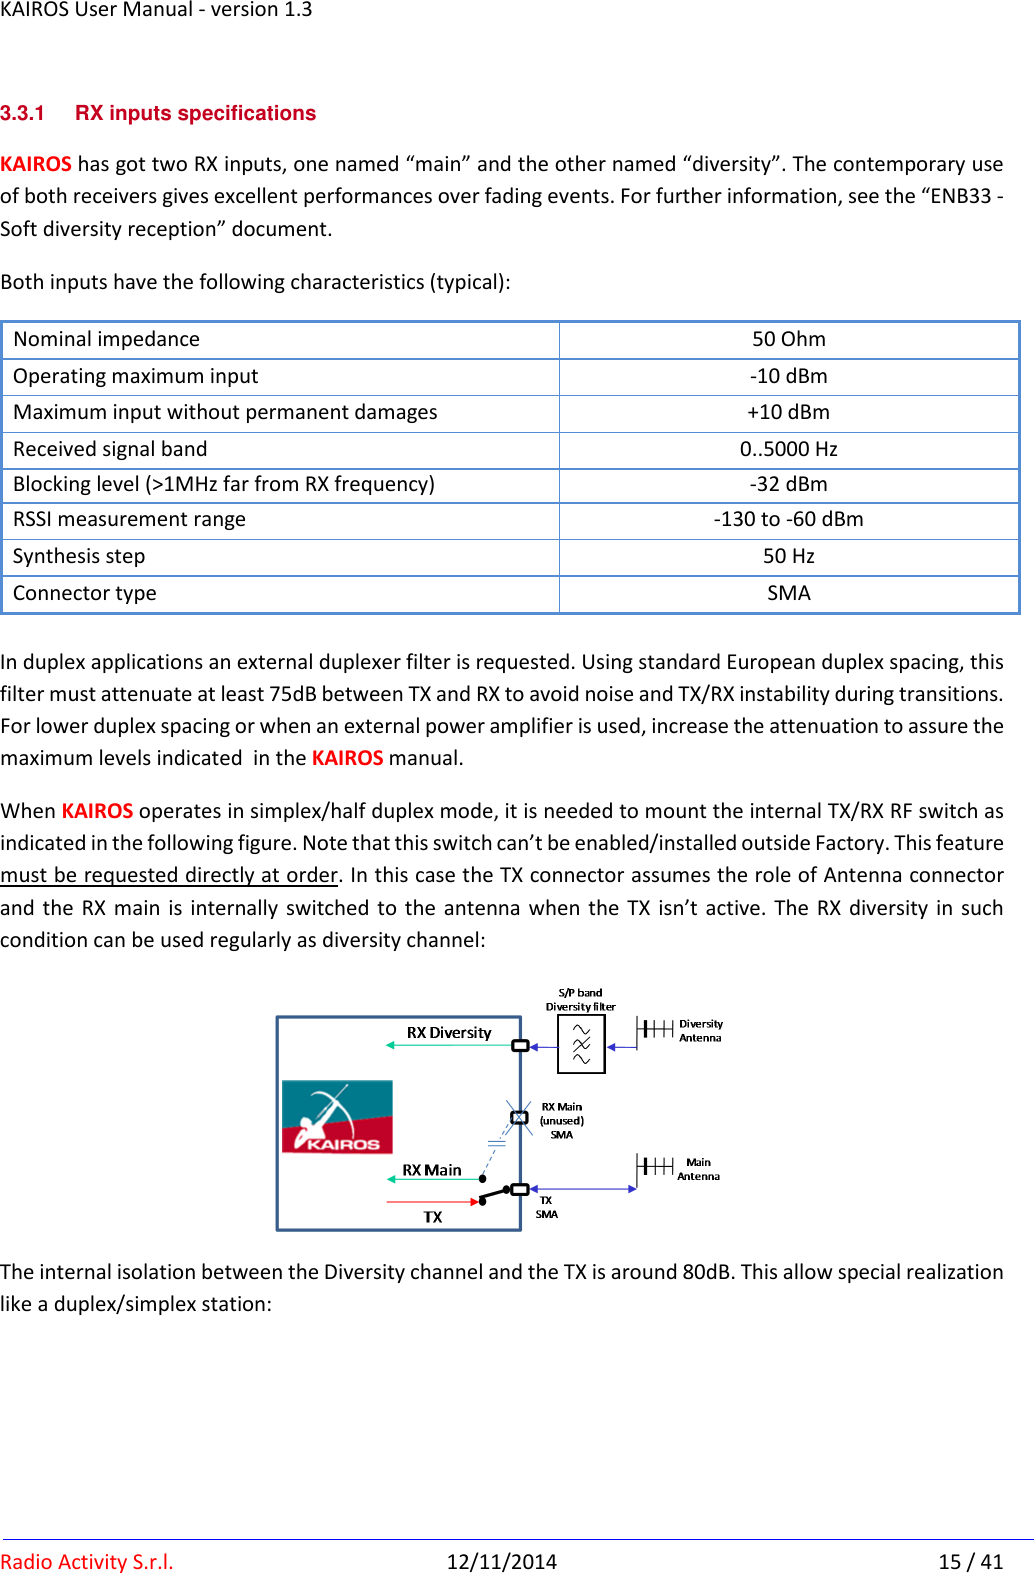 KAIROS User Manual - version 1.3   Radio Activity S.r.l.  12/11/2014  15 / 41 3.3.1  RX inputs specifications KAIROS has got two RX inputs, one named “main” and the other named “diversity”. The contemporary use of both receivers gives excellent performances over fading events. For further information, see the “ENB33 - Soft diversity reception” document. Both inputs have the following characteristics (typical): Nominal impedance  50 Ohm Operating maximum input  -10 dBm Maximum input without permanent damages  +10 dBm Received signal band  0..5000 Hz Blocking level (&gt;1MHz far from RX frequency) -32 dBm RSSI measurement range  -130 to -60 dBm Synthesis step  50 Hz Connector type  SMA  In duplex applications an external duplexer filter is requested. Using standard European duplex spacing, this filter must attenuate at least 75dB between TX and RX to avoid noise and TX/RX instability during transitions. For lower duplex spacing or when an external power amplifier is used, increase the attenuation to assure the maximum levels indicated  in the KAIROS manual. When KAIROS operates in simplex/half duplex mode, it is needed to mount the internal TX/RX RF switch as indicated in the following figure. Note that this switch can’t be enabled/installed outside Factory. This feature must be requested directly at order. In this case the TX connector assumes the role of Antenna connector and the  RX  main  is  internally switched to  the antenna when the TX isn’t  active. The  RX  diversity in  such condition can be used regularly as diversity channel:  The internal isolation between the Diversity channel and the TX is around 80dB. This allow special realization like a duplex/simplex station: 